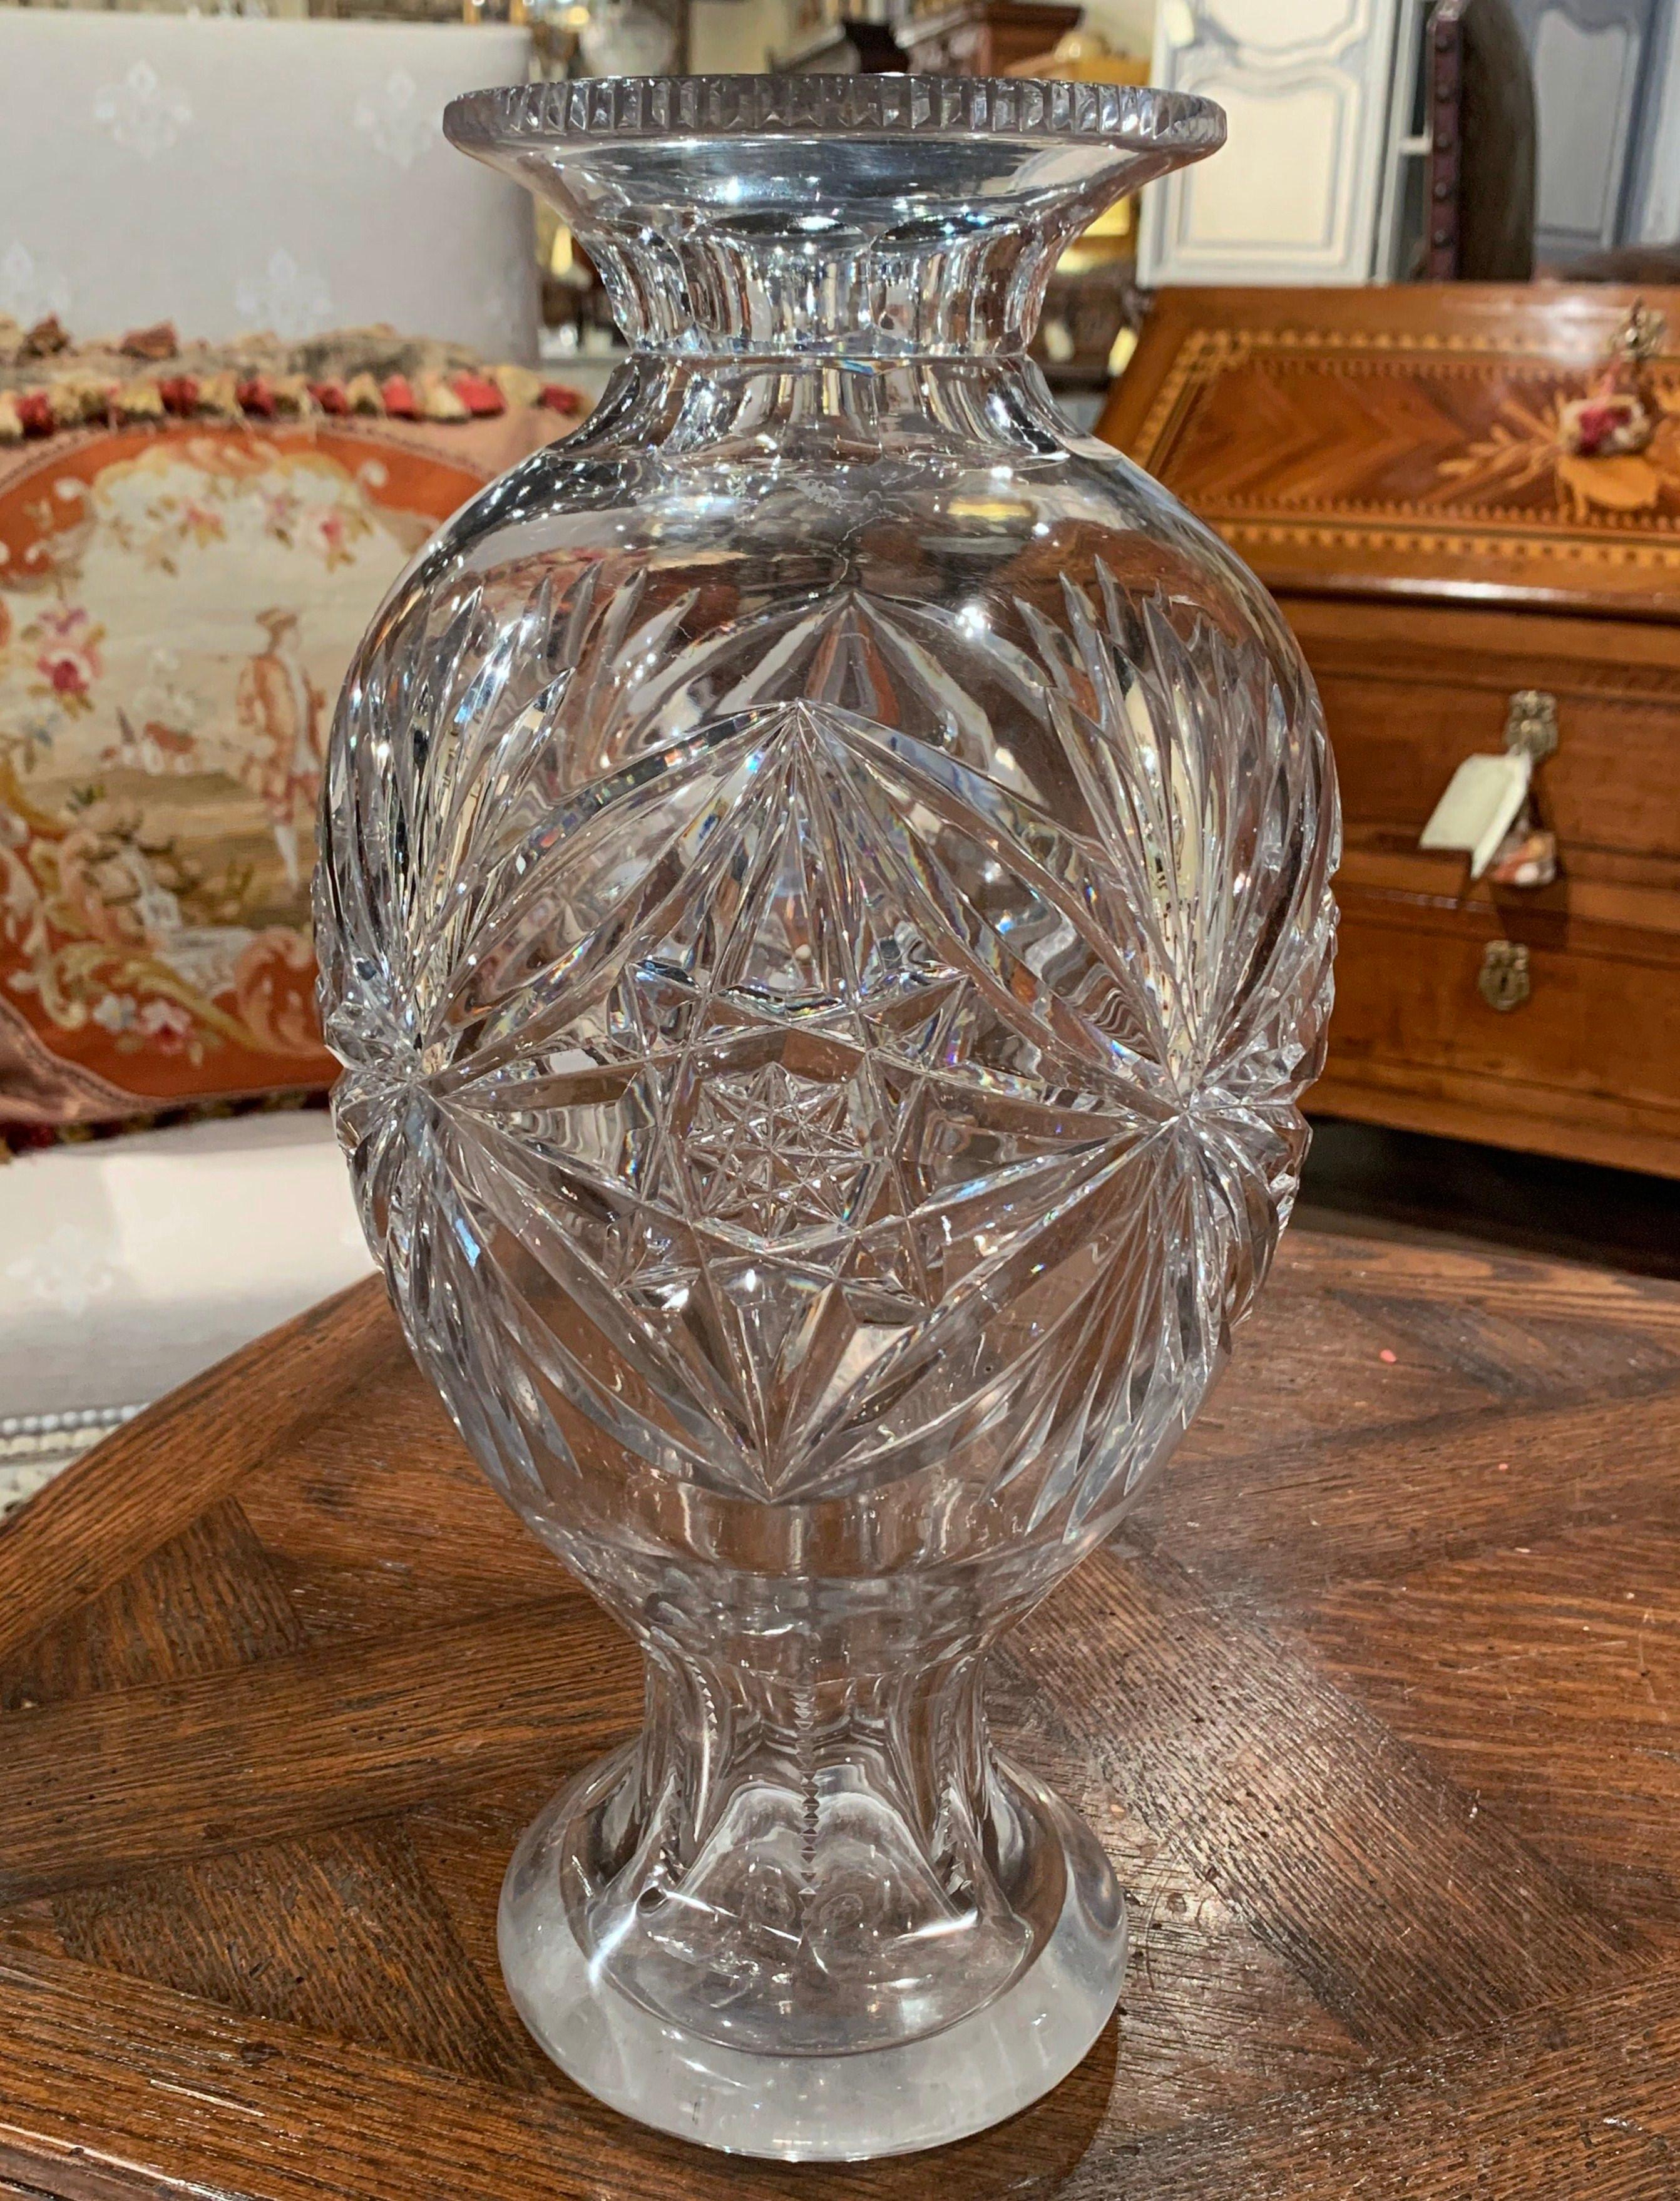 Decorate a console table or buffet with this elegant tall vase. Crafted in France circa 1970, the large luxurious cut glass vessel is round in shape and decorated throughout with leaf, star and sun decor. The thick heavy vase is in excellent